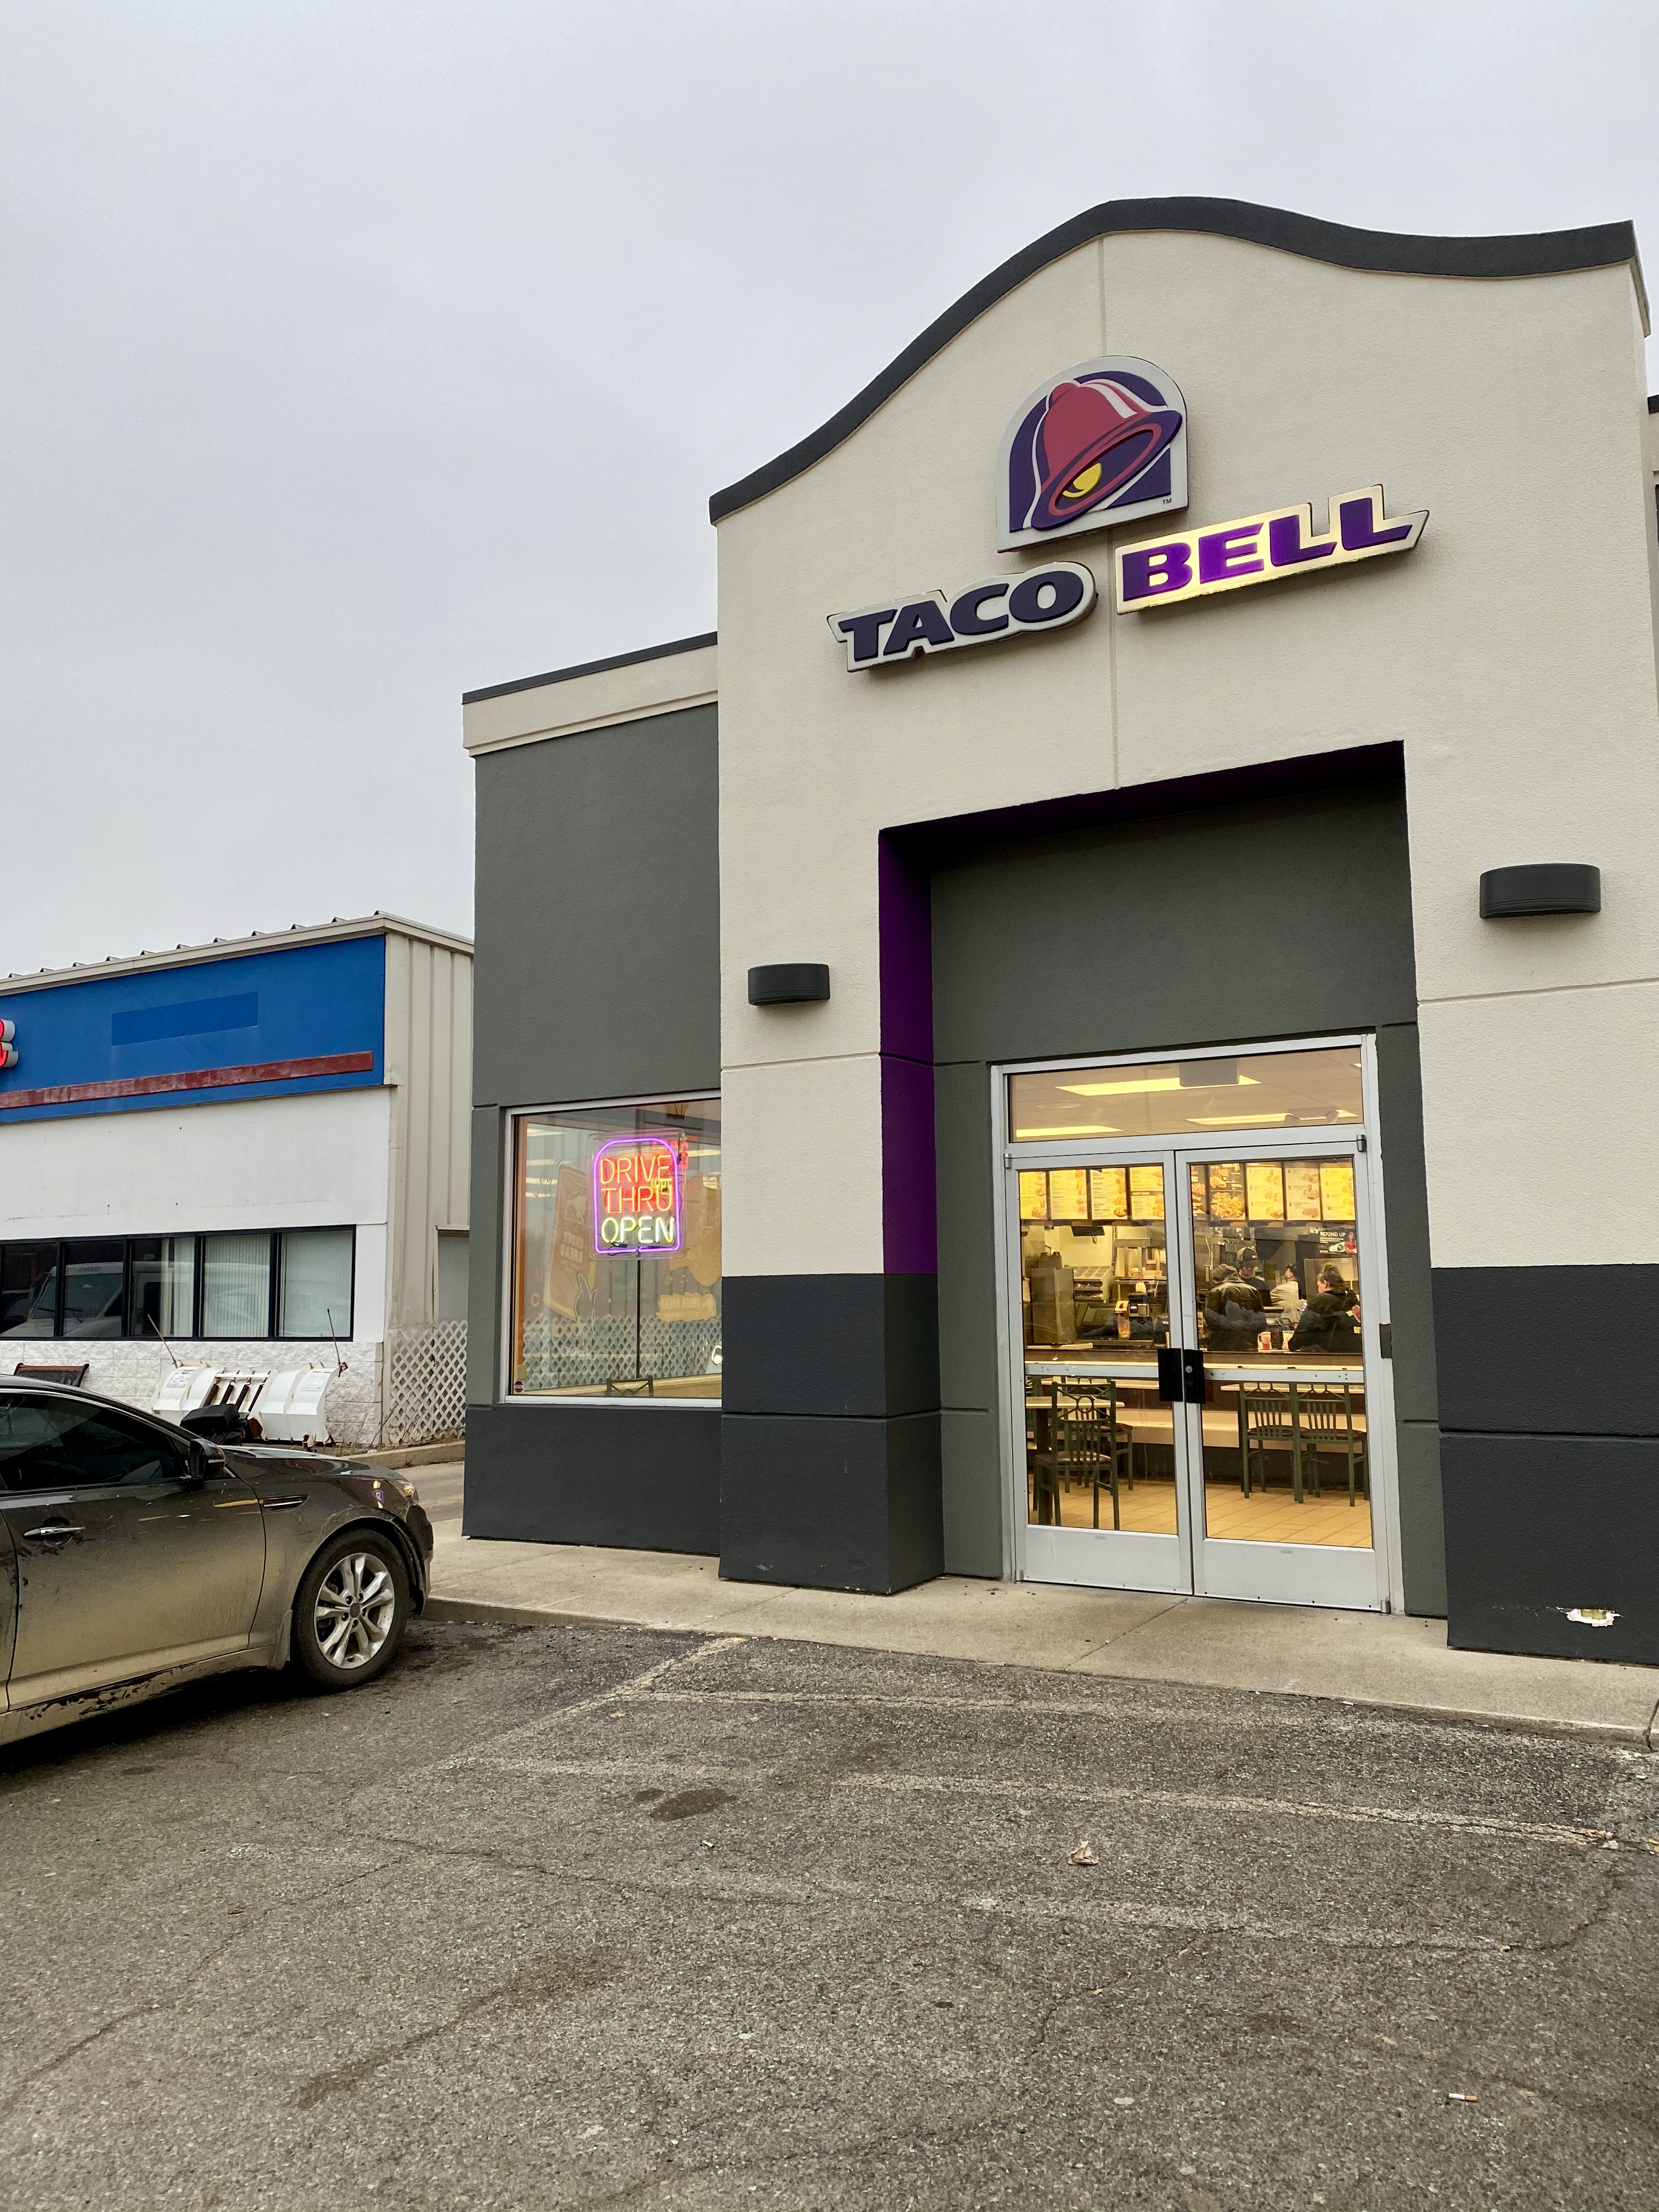 Man who destroyed Taco Bell pleads guilty, will face sentencing Feb. 24